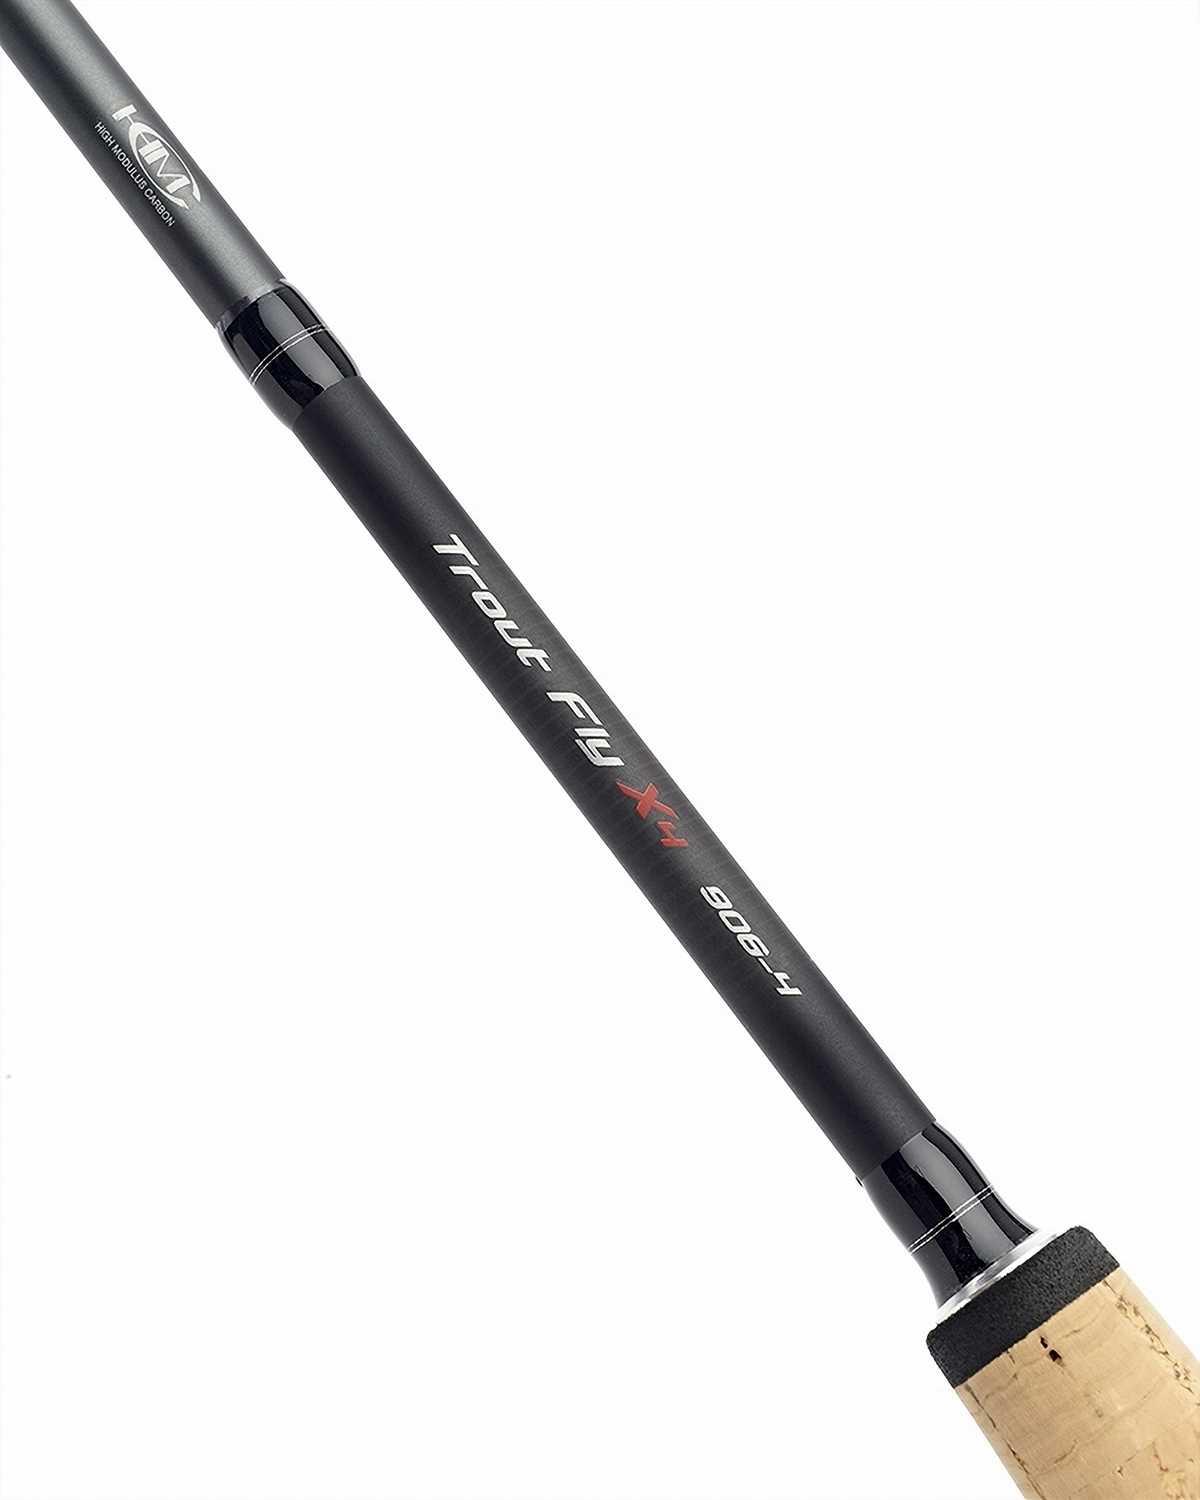 FLY ROD DAIWA SILVERCREEK #9 TESTING/ FLY FISHING FOR PIKES IN THE